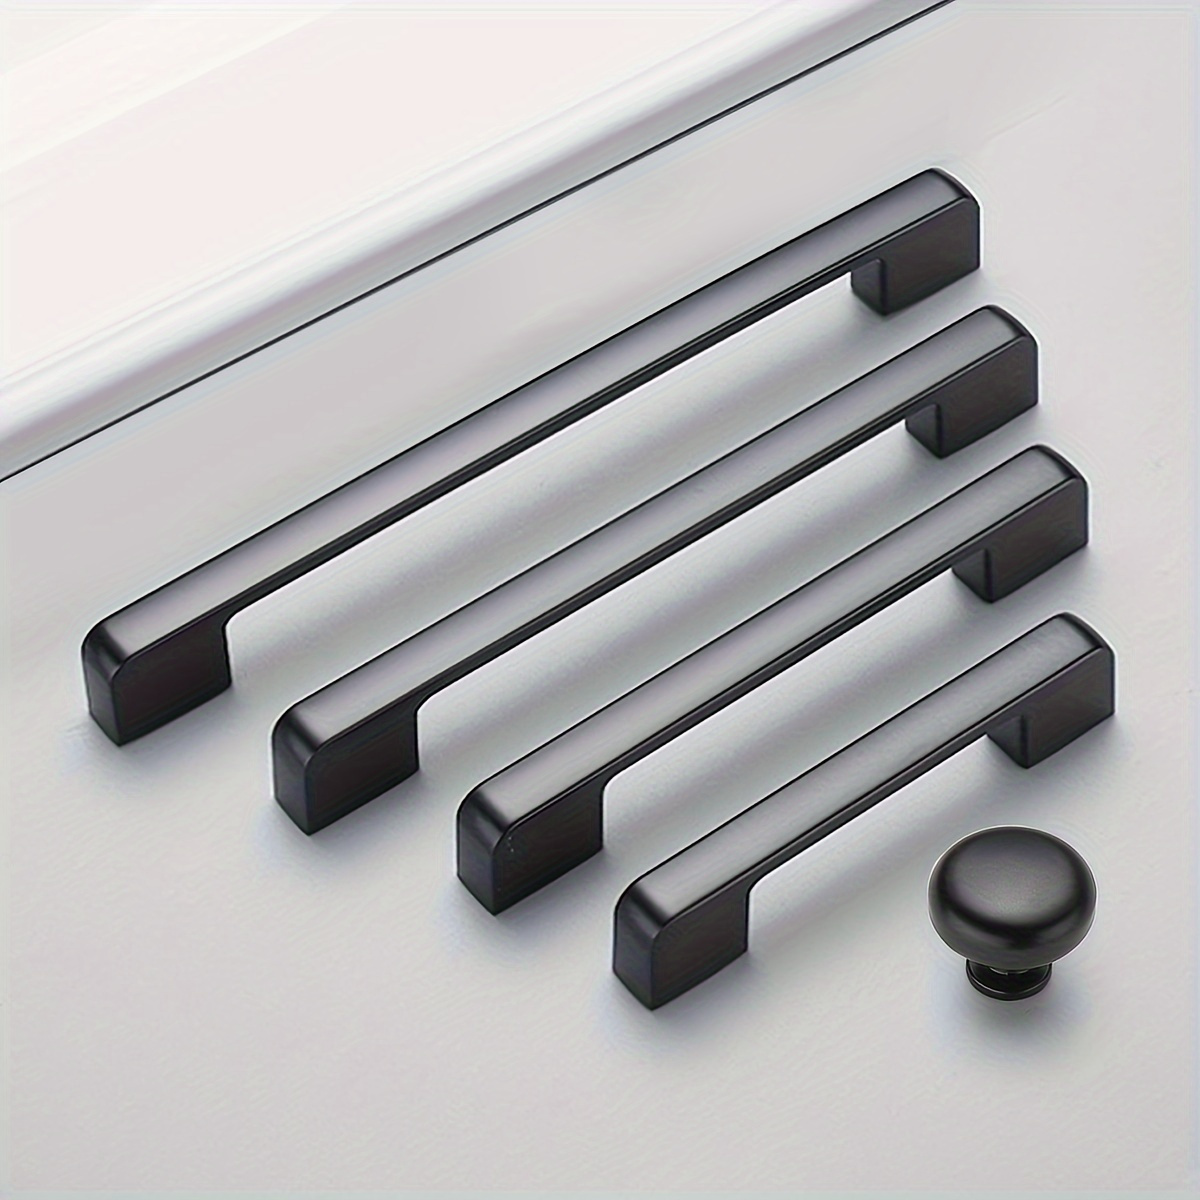 

1pc Aluminum Alloy Black Cabinet Handles, American Style Solid Kitchen Cupboard Pulls, Drawer Knobs, Furniture Hardware